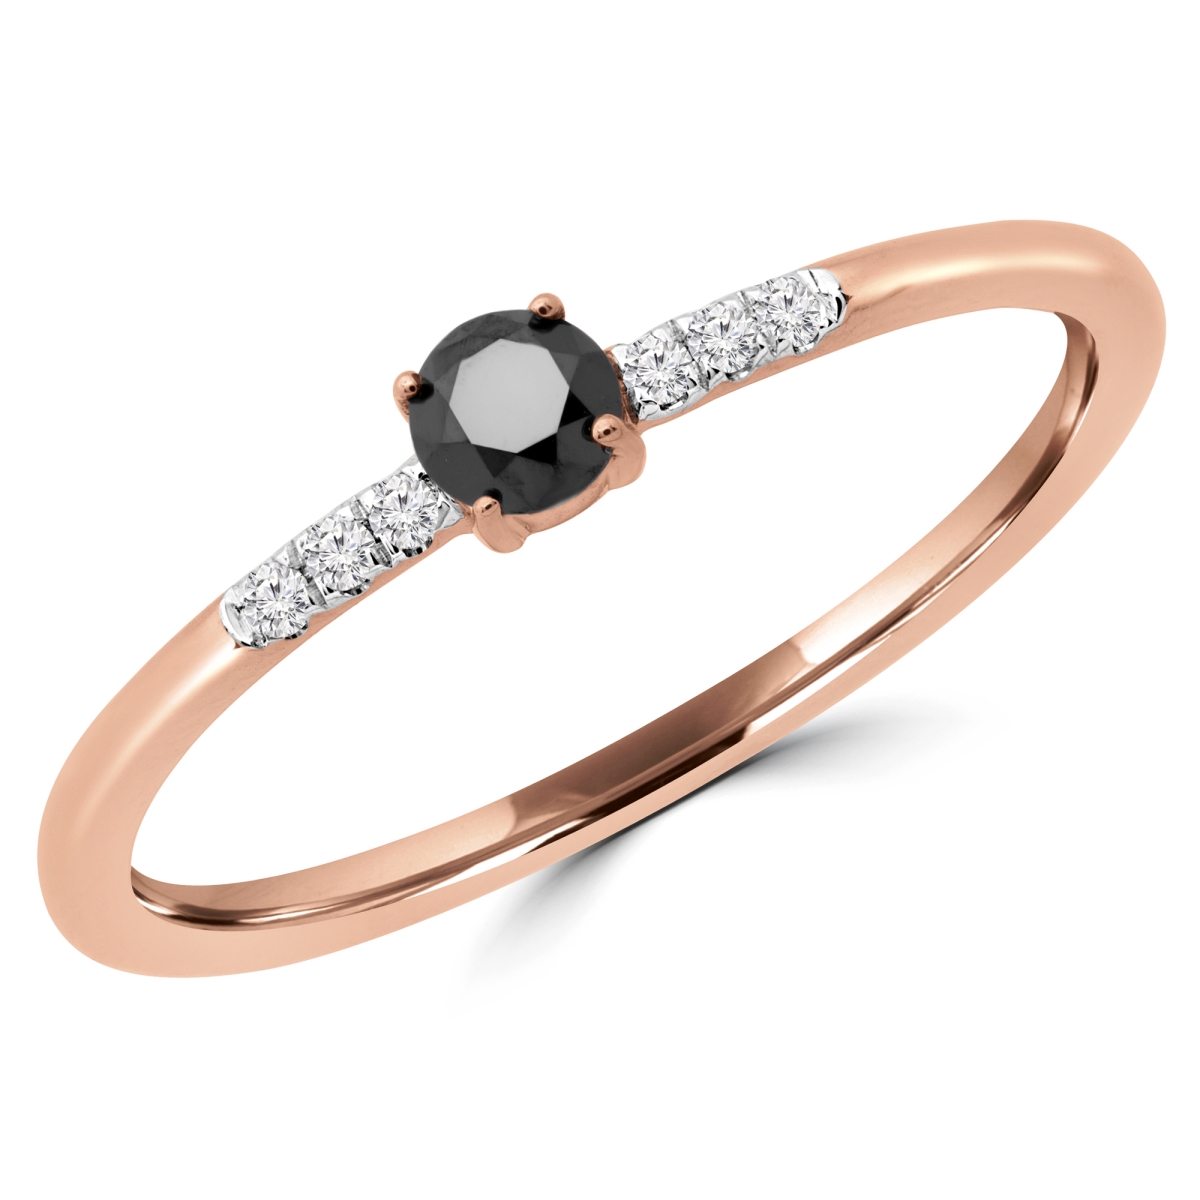 Picture of Majesty Diamonds MDR190079-7.5 0.16 CTW Round Black Diamond Bezel Set Cocktail Ring in 14K Rose Gold - Size 7.5